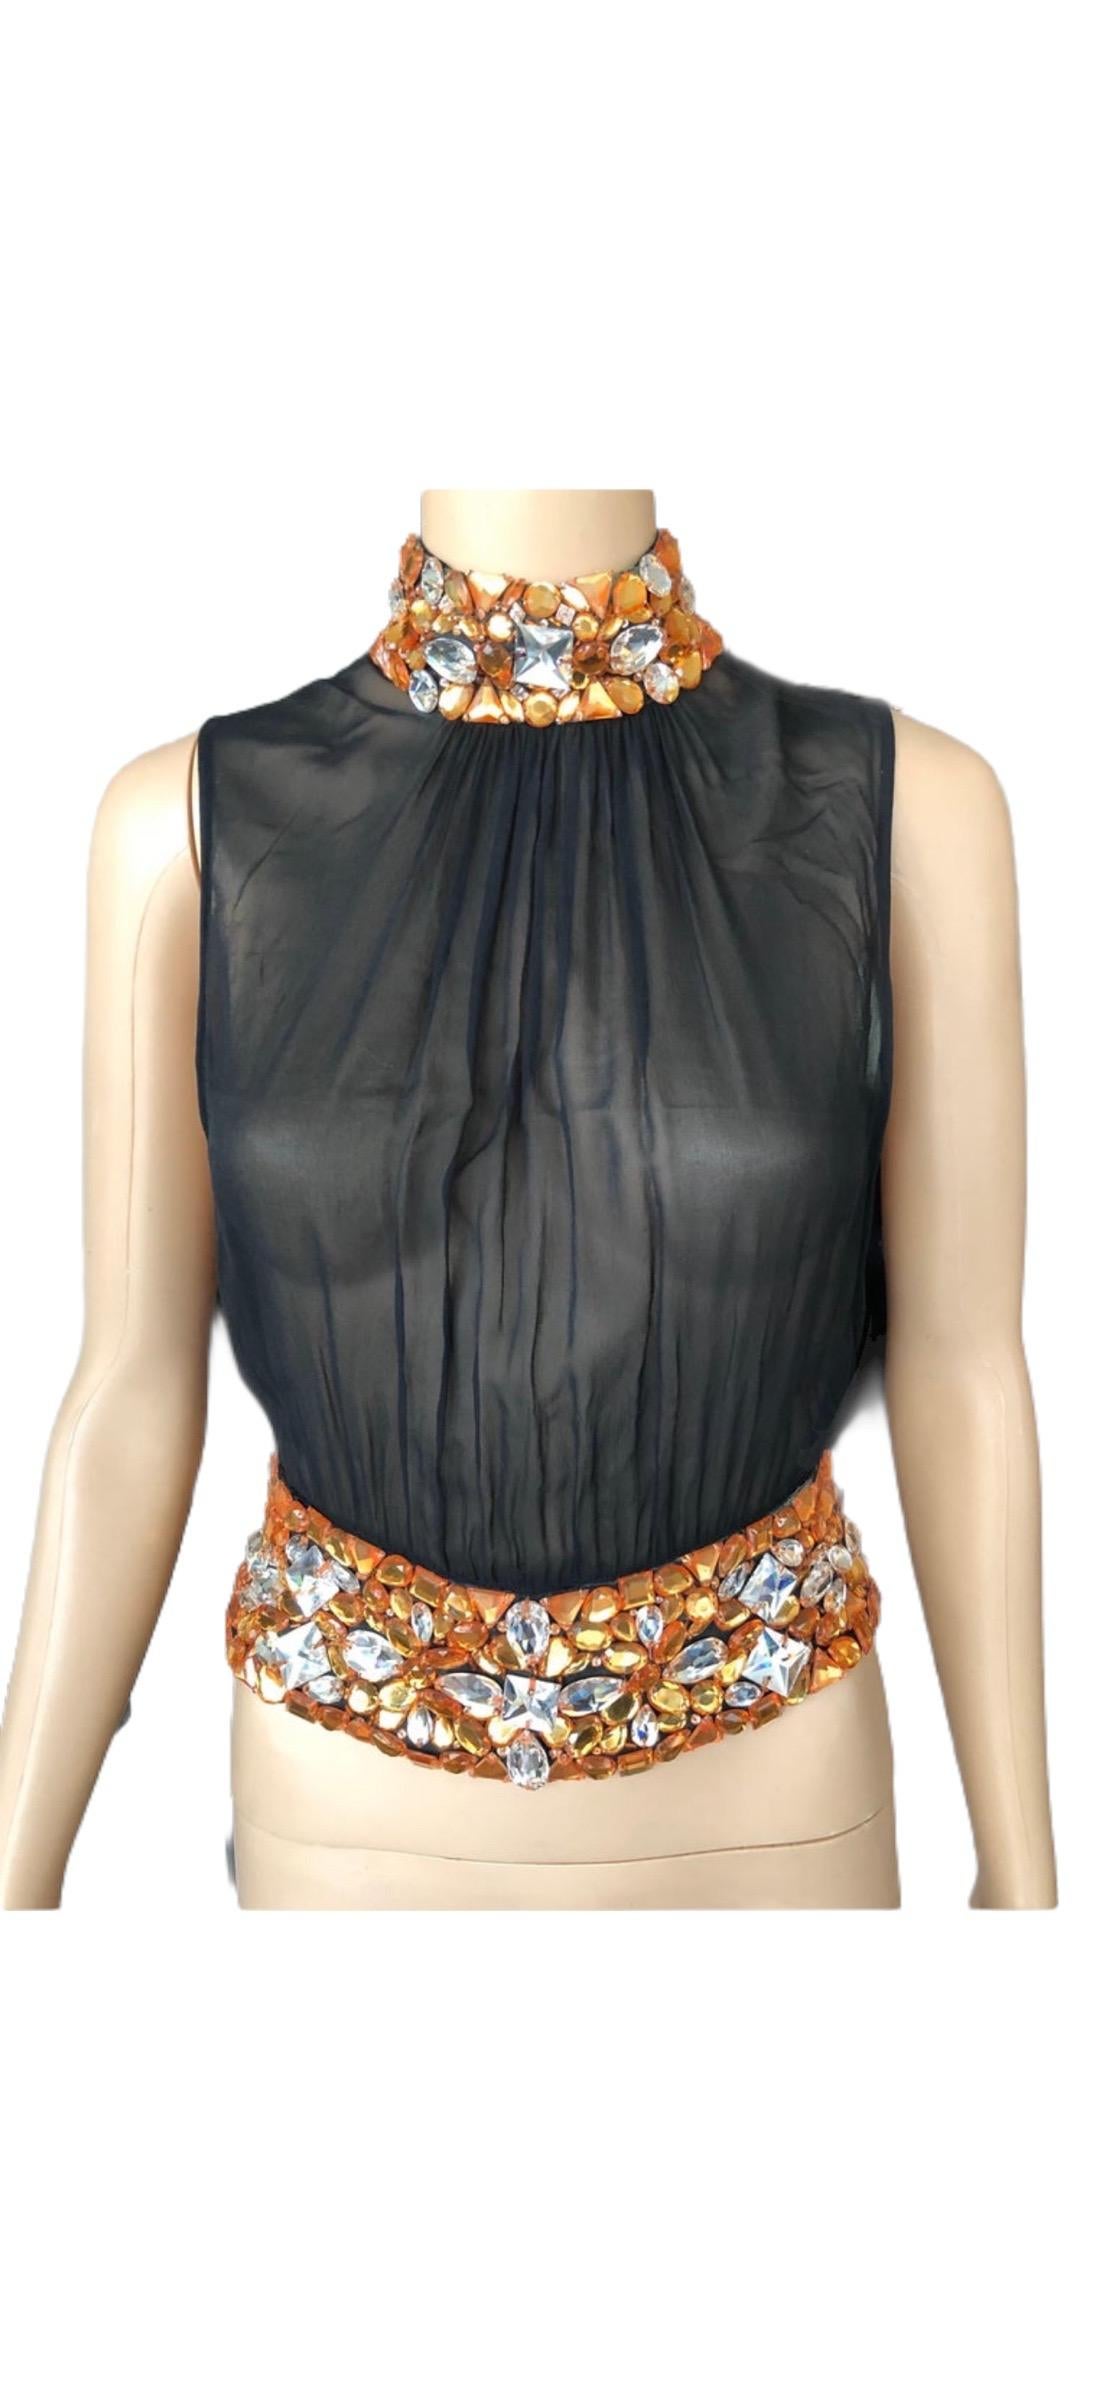 Gianni Versace Couture S/S 2000 Runway Embellished Sheer Top & Pants 2 Piece Set For Sale 7